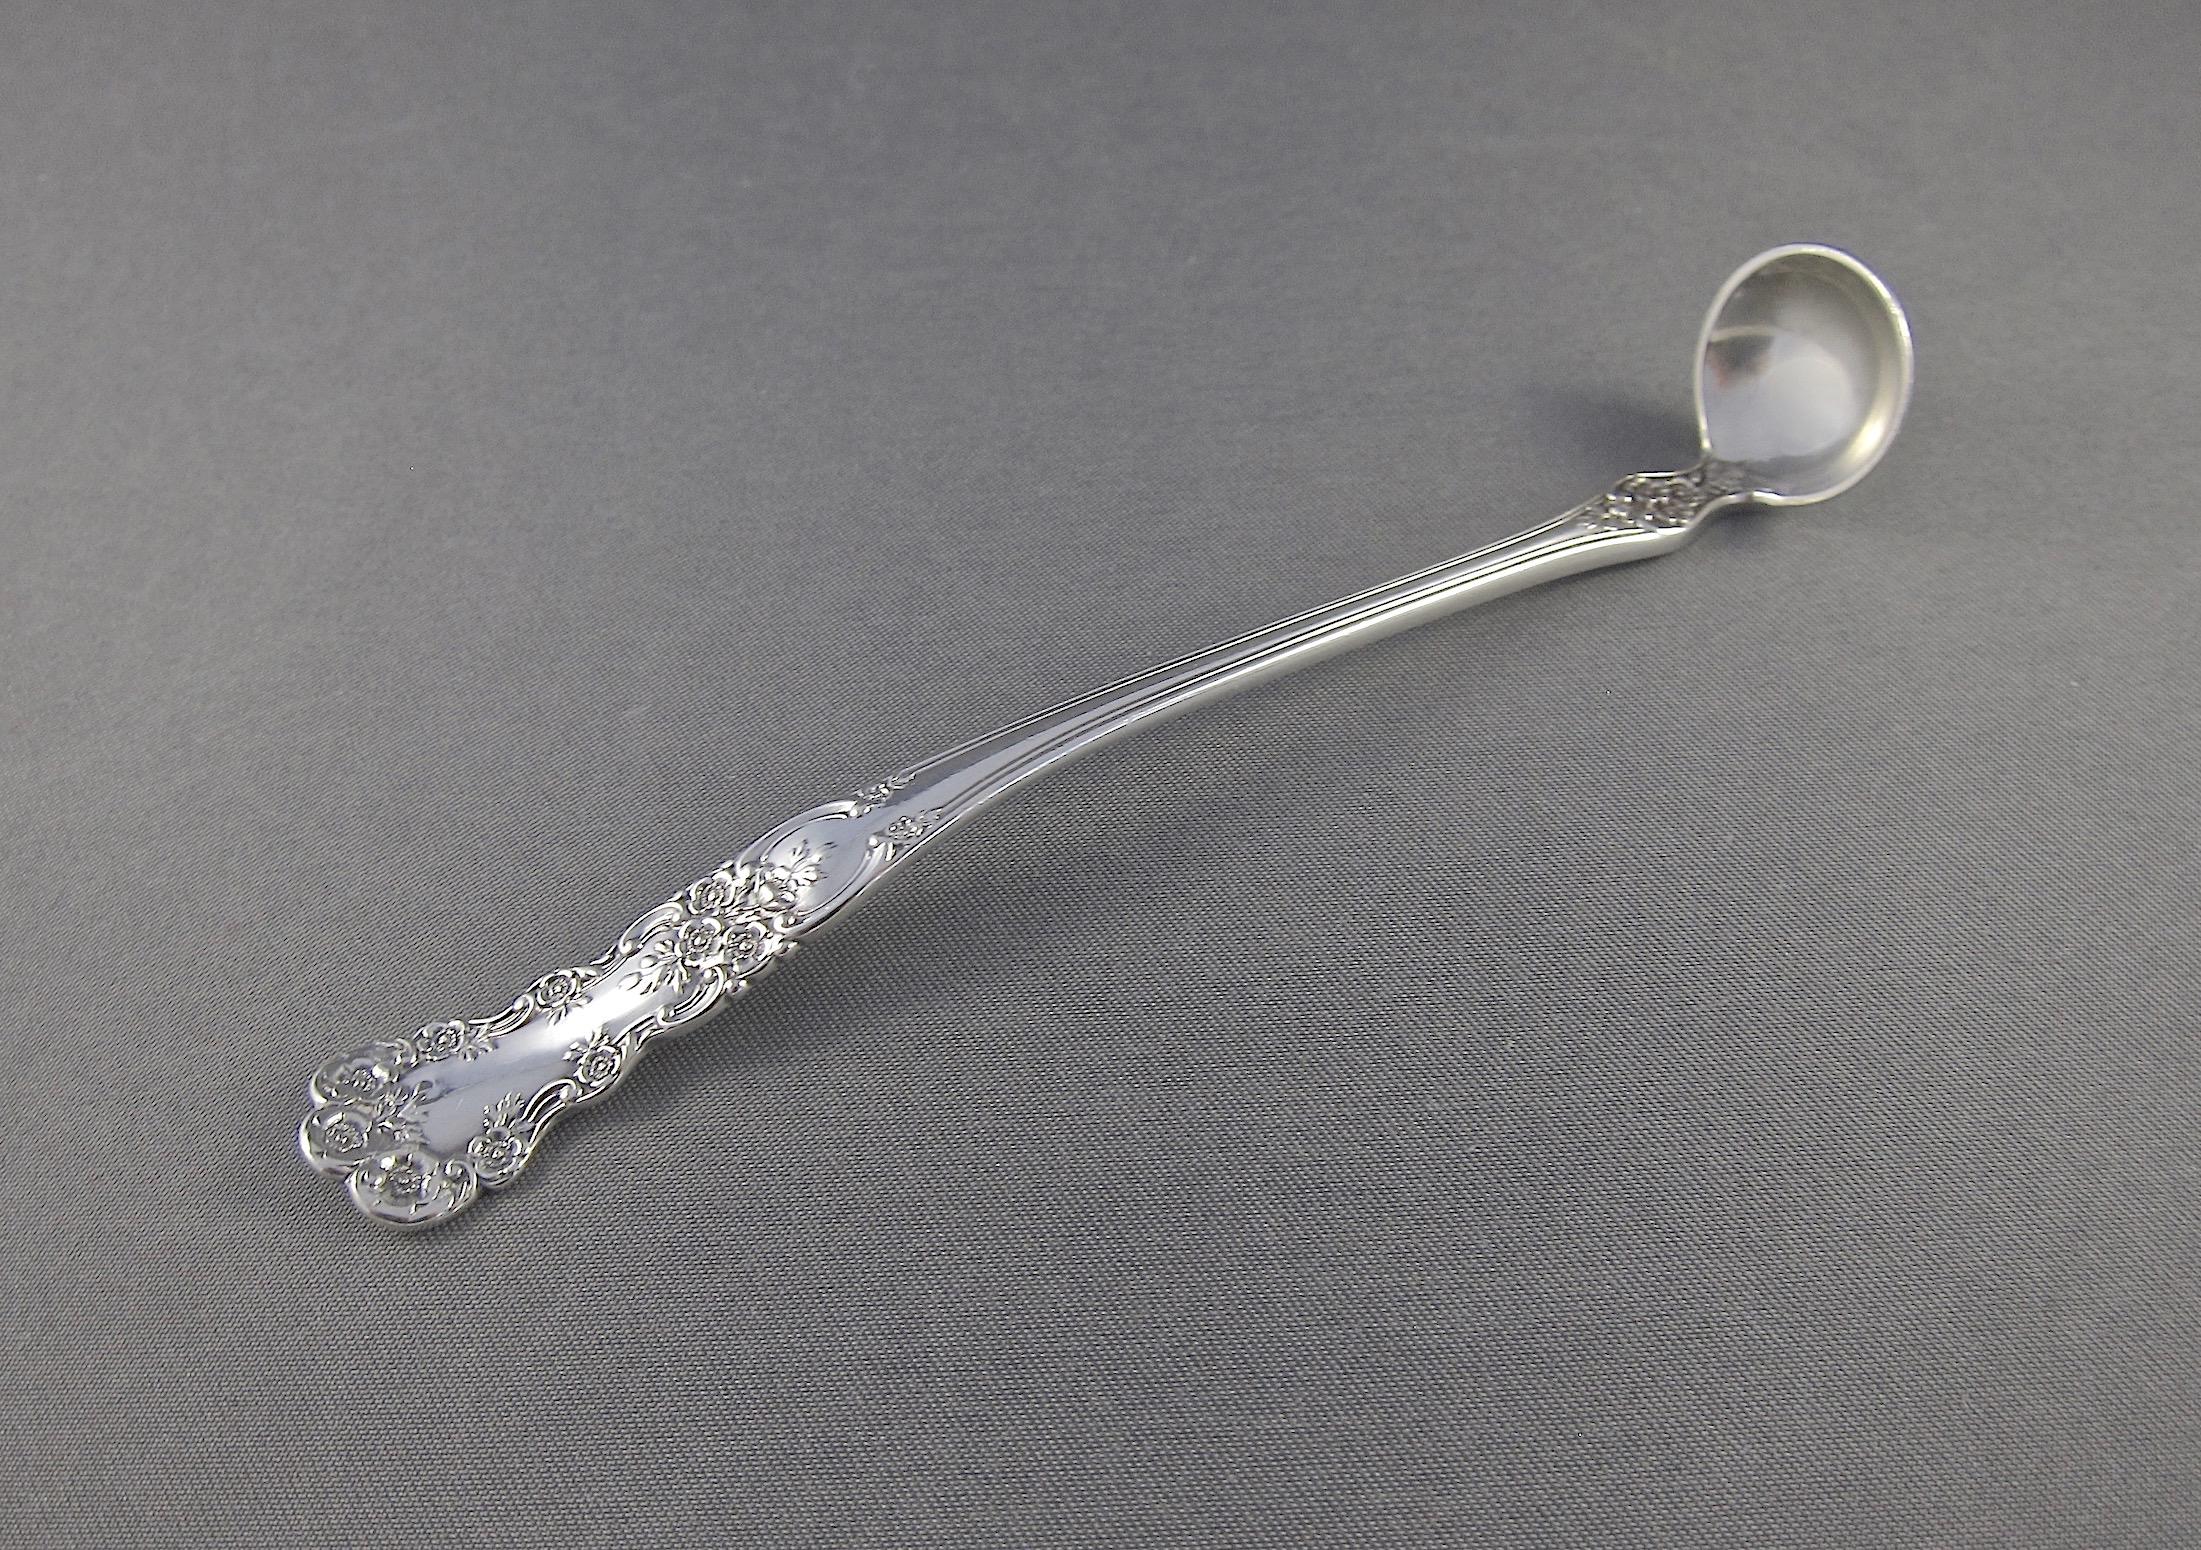 An antique sterling silver mustard spoon from the collection and estate of Peggy and David Rockefeller. The solid silver spoon was made by Gorham Manufacturing Company of Providence, Rhode Island.

The ornamental spoon is decorated with delicate